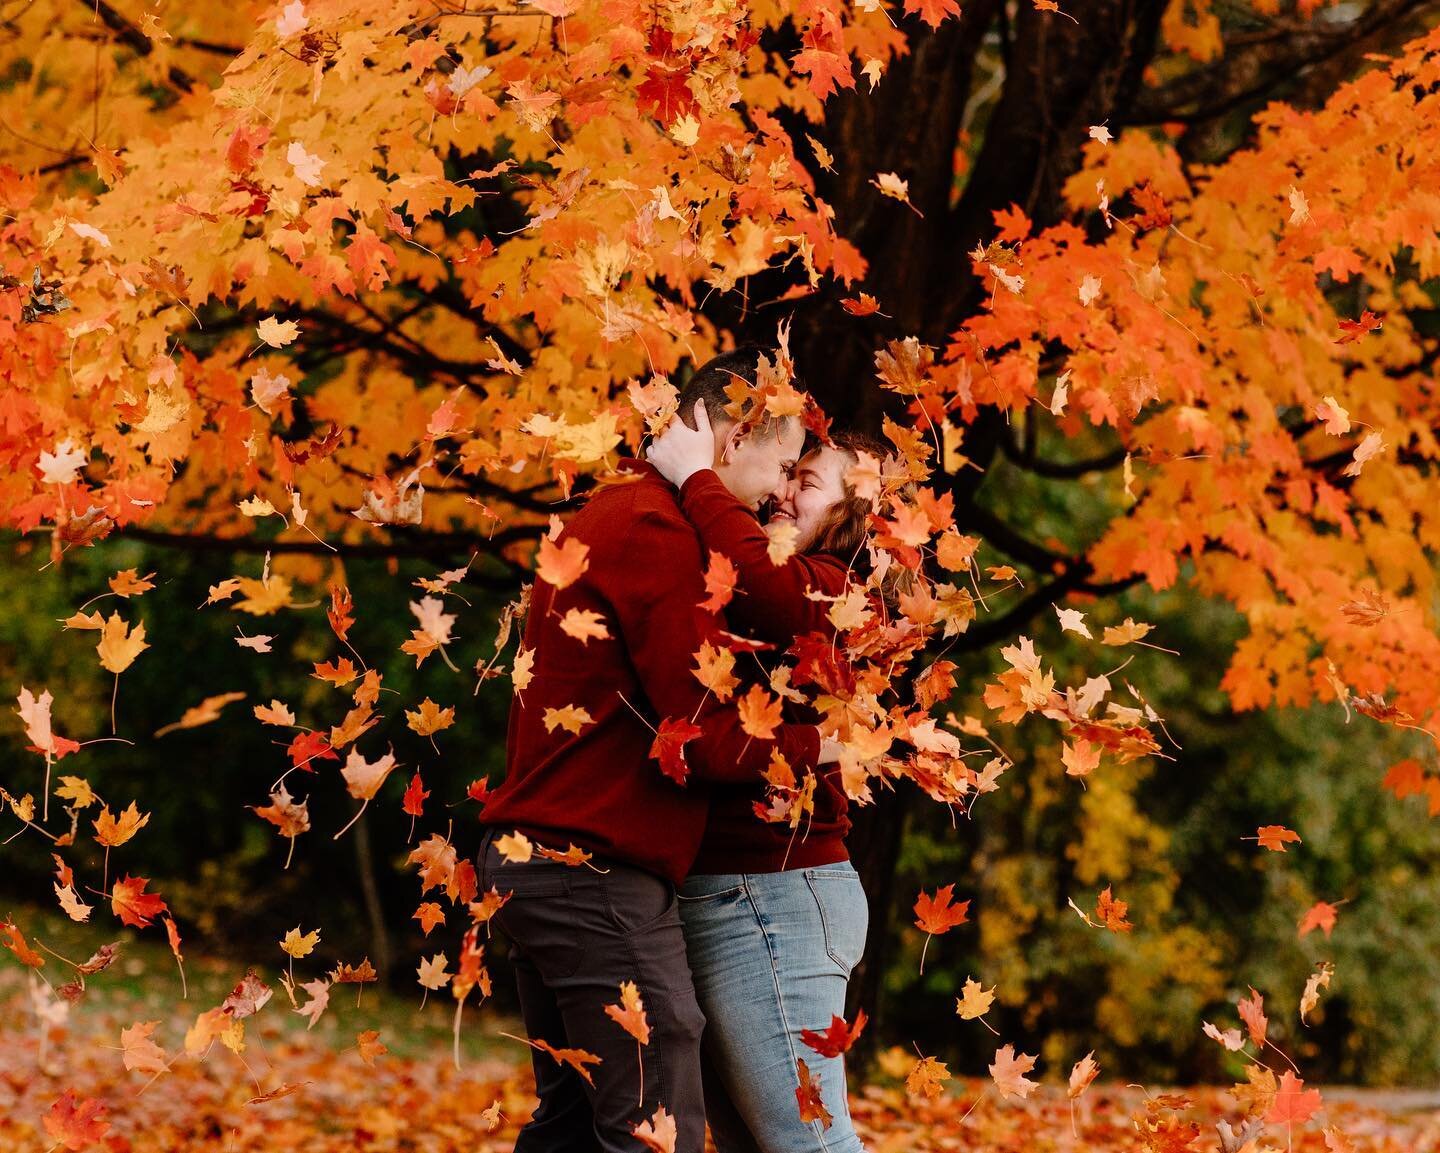 🍁 🍁 🍁 🍁 🍁 🍁
 🍁 🍁 🍁 🍁 🍁 🍁
 🍁🍁 ✨🤍 🍁🍁
🍁 🍁 🍁 🍁 🍁 🍁
 🍁 🍁 🍁 🍁 🍁 🍁
(All that to say, they&rsquo;re unbeleafably cute huh) 
&bull;
&bull;
&bull;
&bull;
#capjoyphoto #capjoy #newhampshirephotographer #nhphotographer #portraitphoto